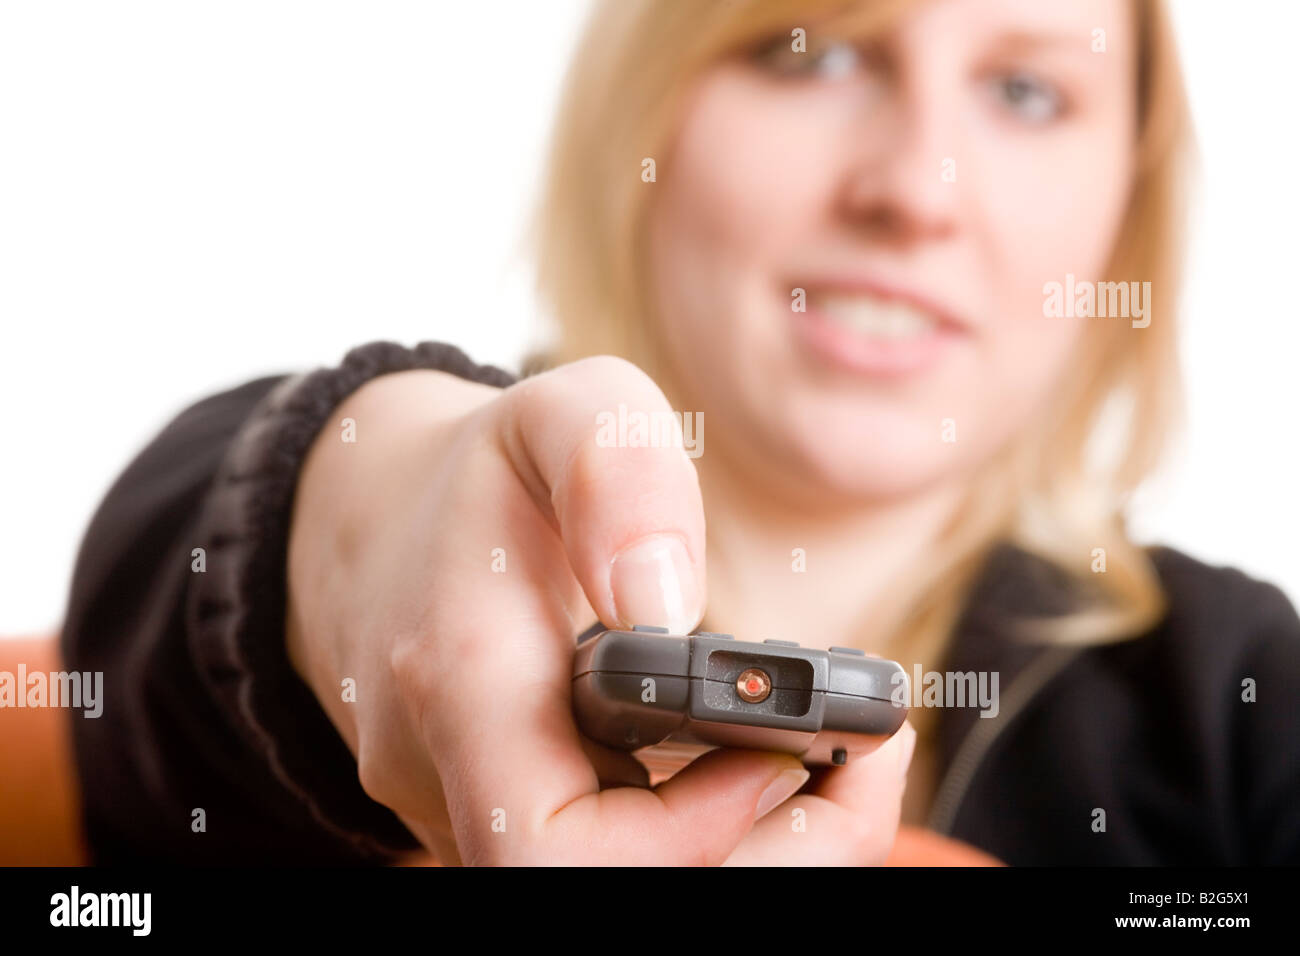 tv remote control shifting chanel surfing Stock Photo